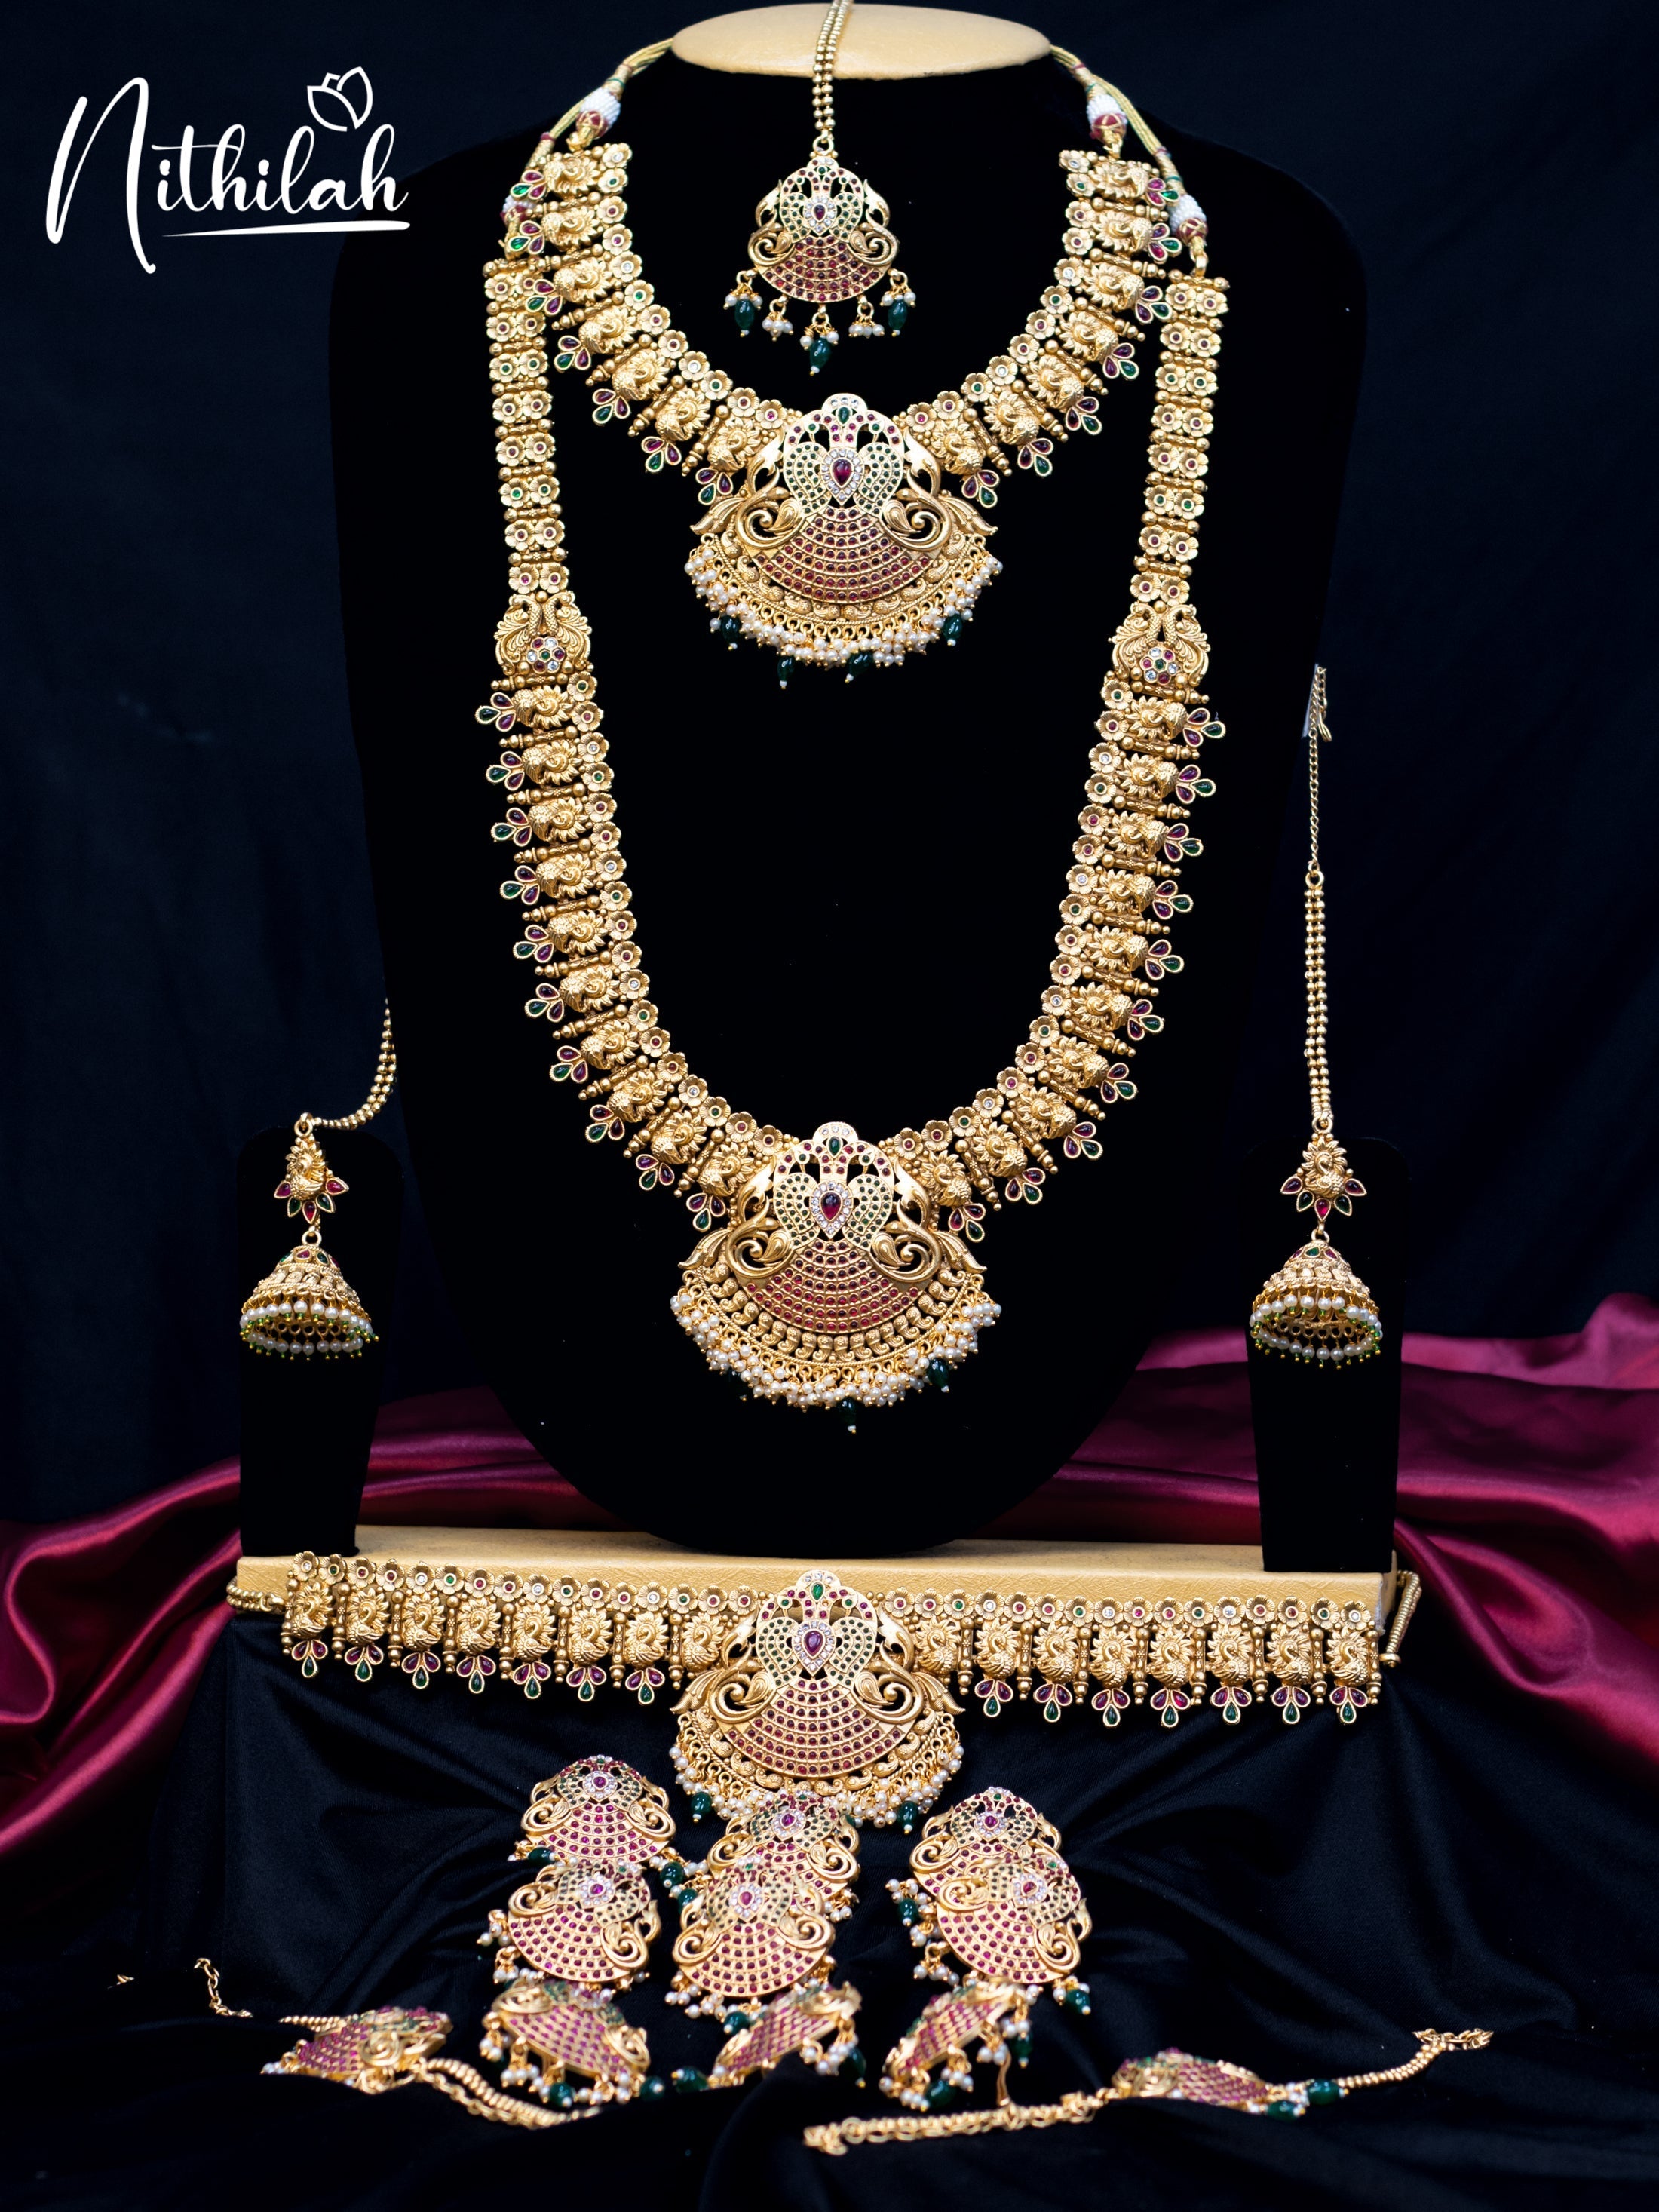 Buy Indian Bridal Jewelry Sets Online at IndiaTrend  Indiatrendshop